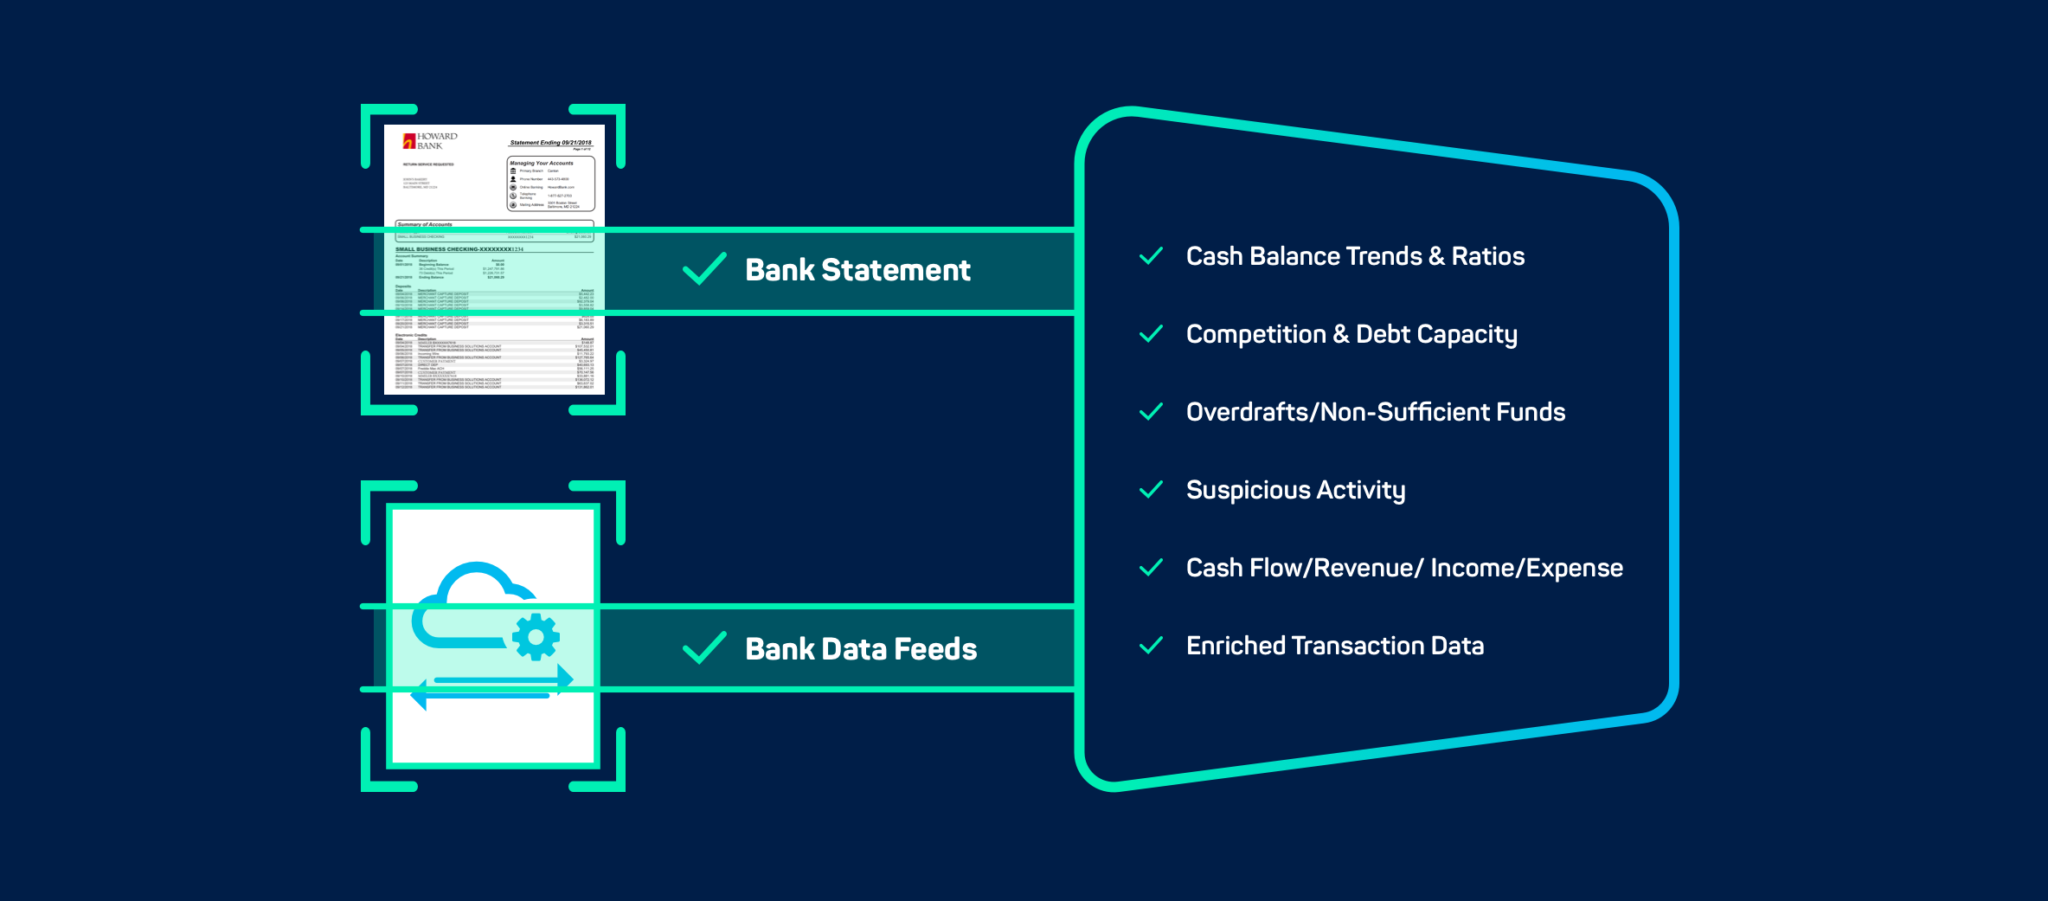 Transform bank statements of any format or quality into clean, structured data. Leverage bank transactions to assess cash-flow trends and credit risk.